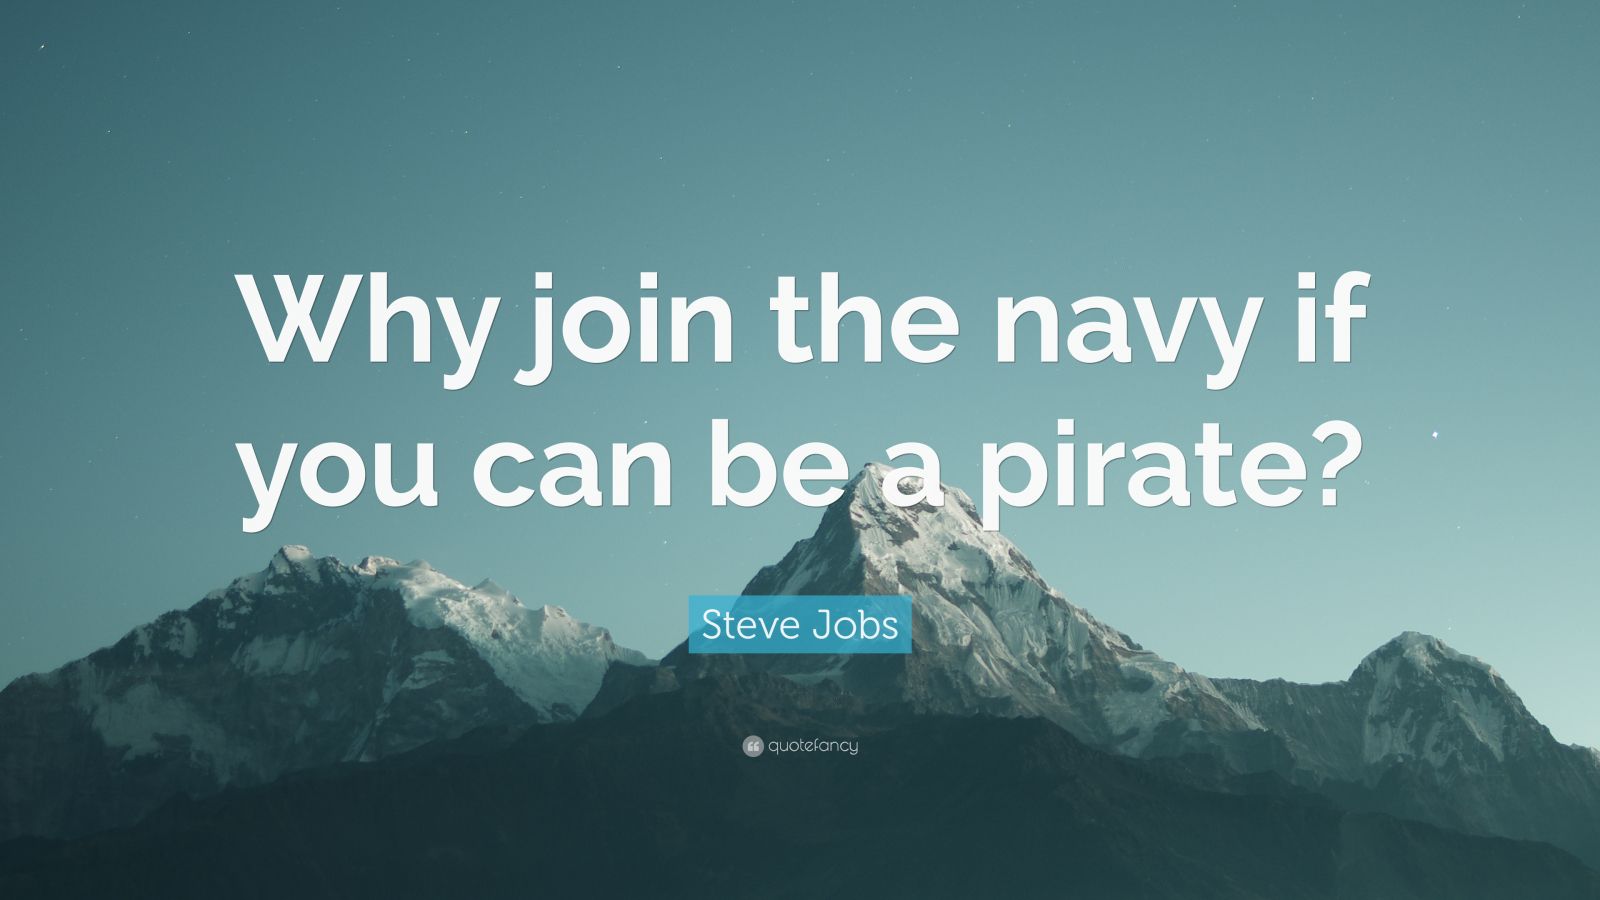 Steve Jobs Quote: “Why join the navy if you can be a pirate?” (21 ...